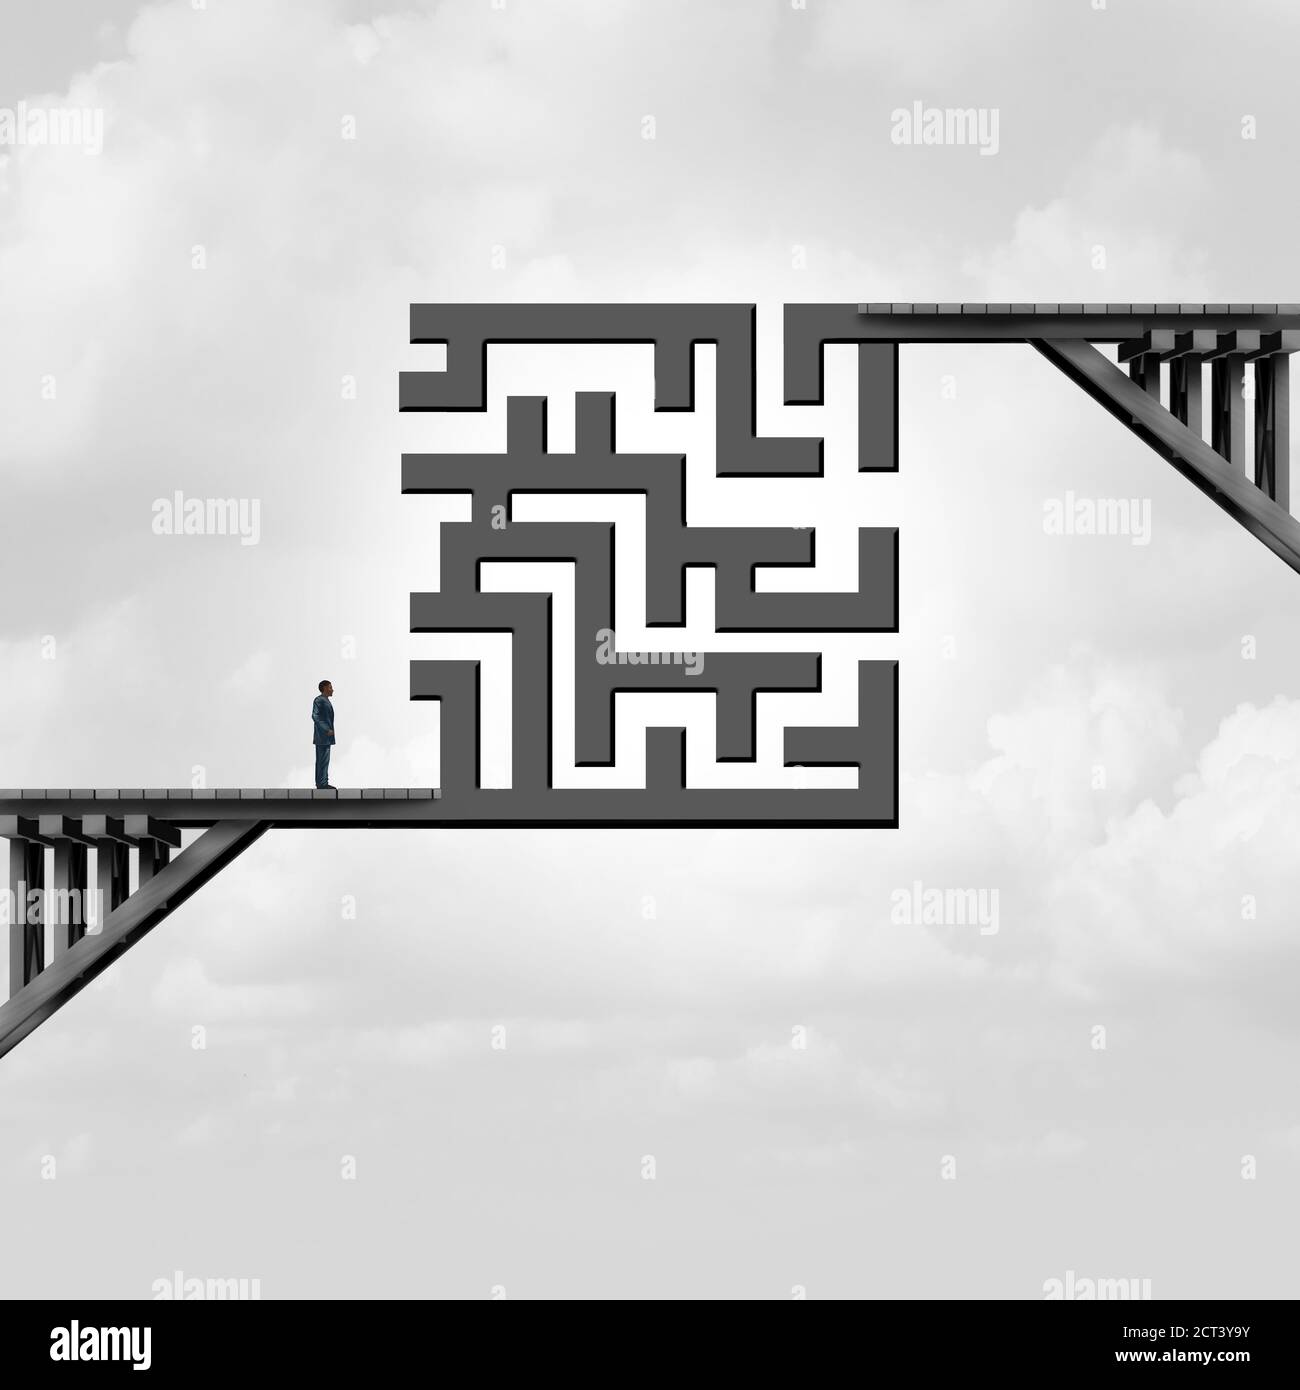 Business concept of challenge and career goal difficulty as a bridge with a maze dividing a path and pathway as a metaphor for corporate strategy. Stock Photo